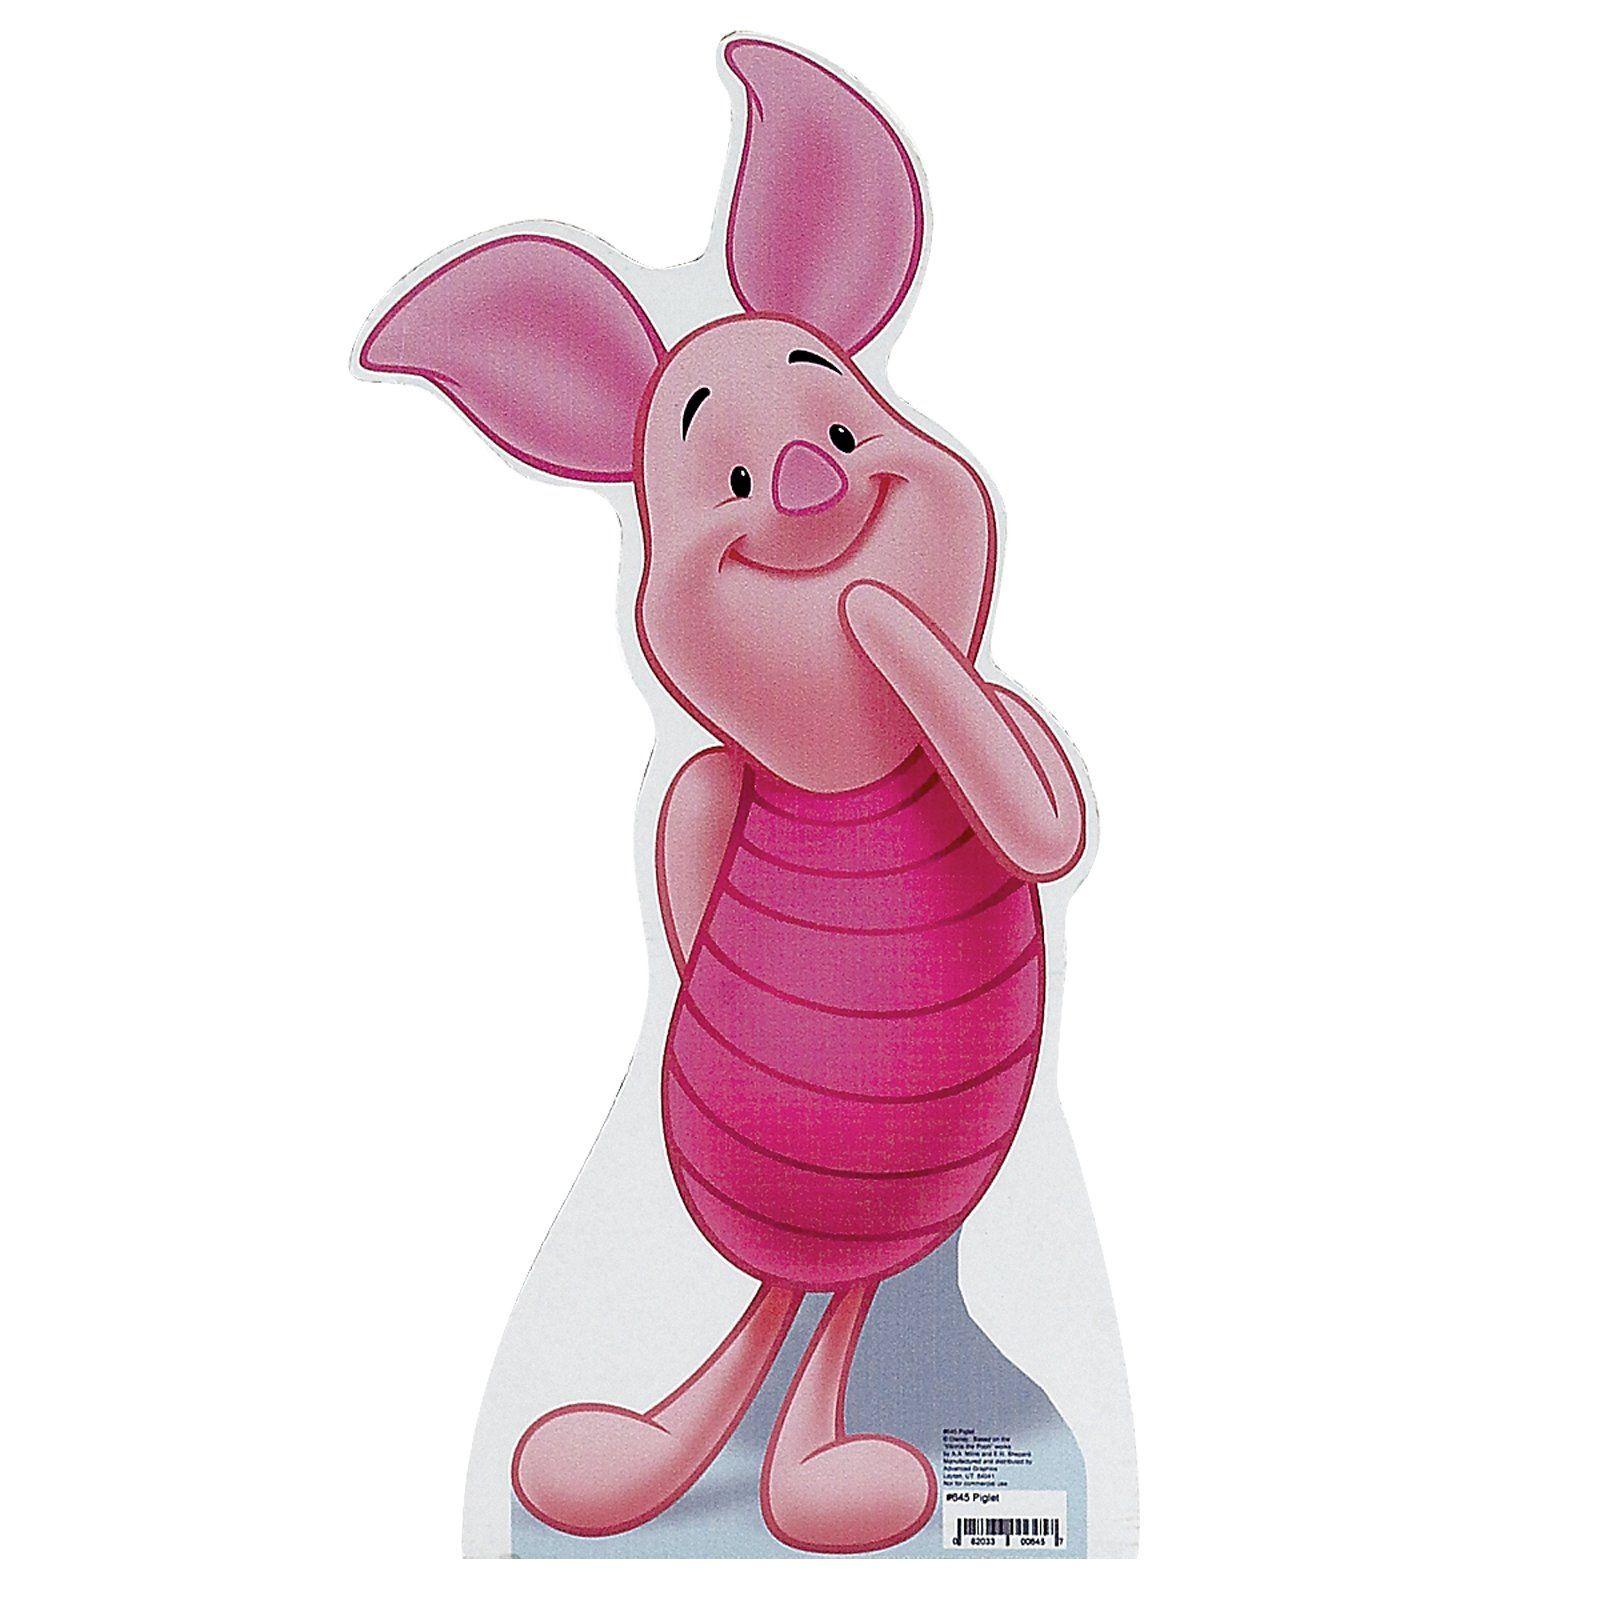 piglet high quality picture, piglet high quality image, piglet high